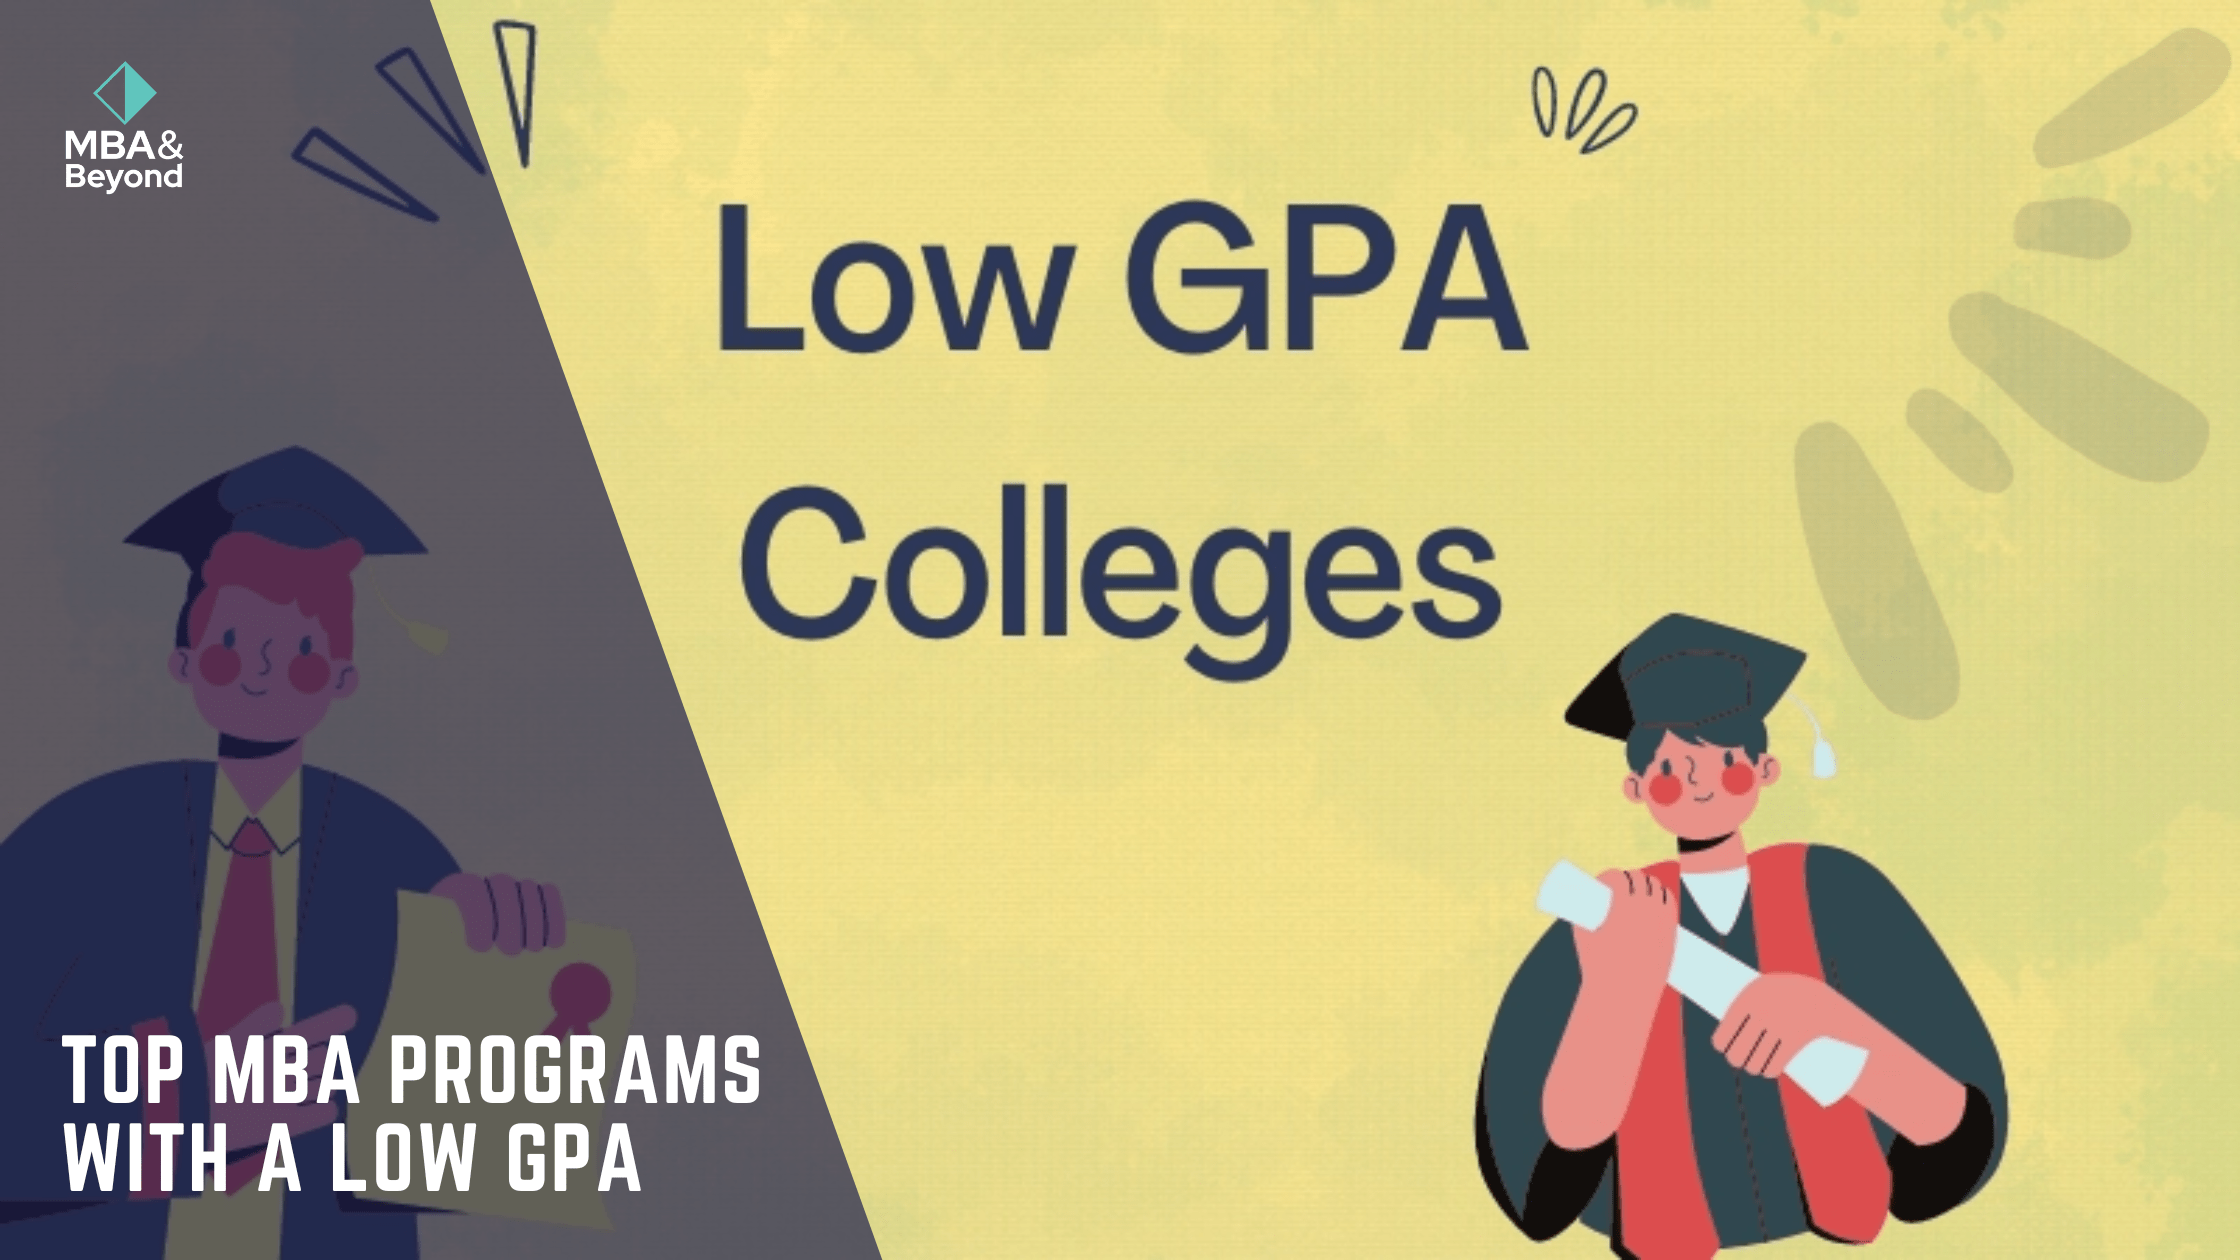 Top MBA Programs with a Low GPA